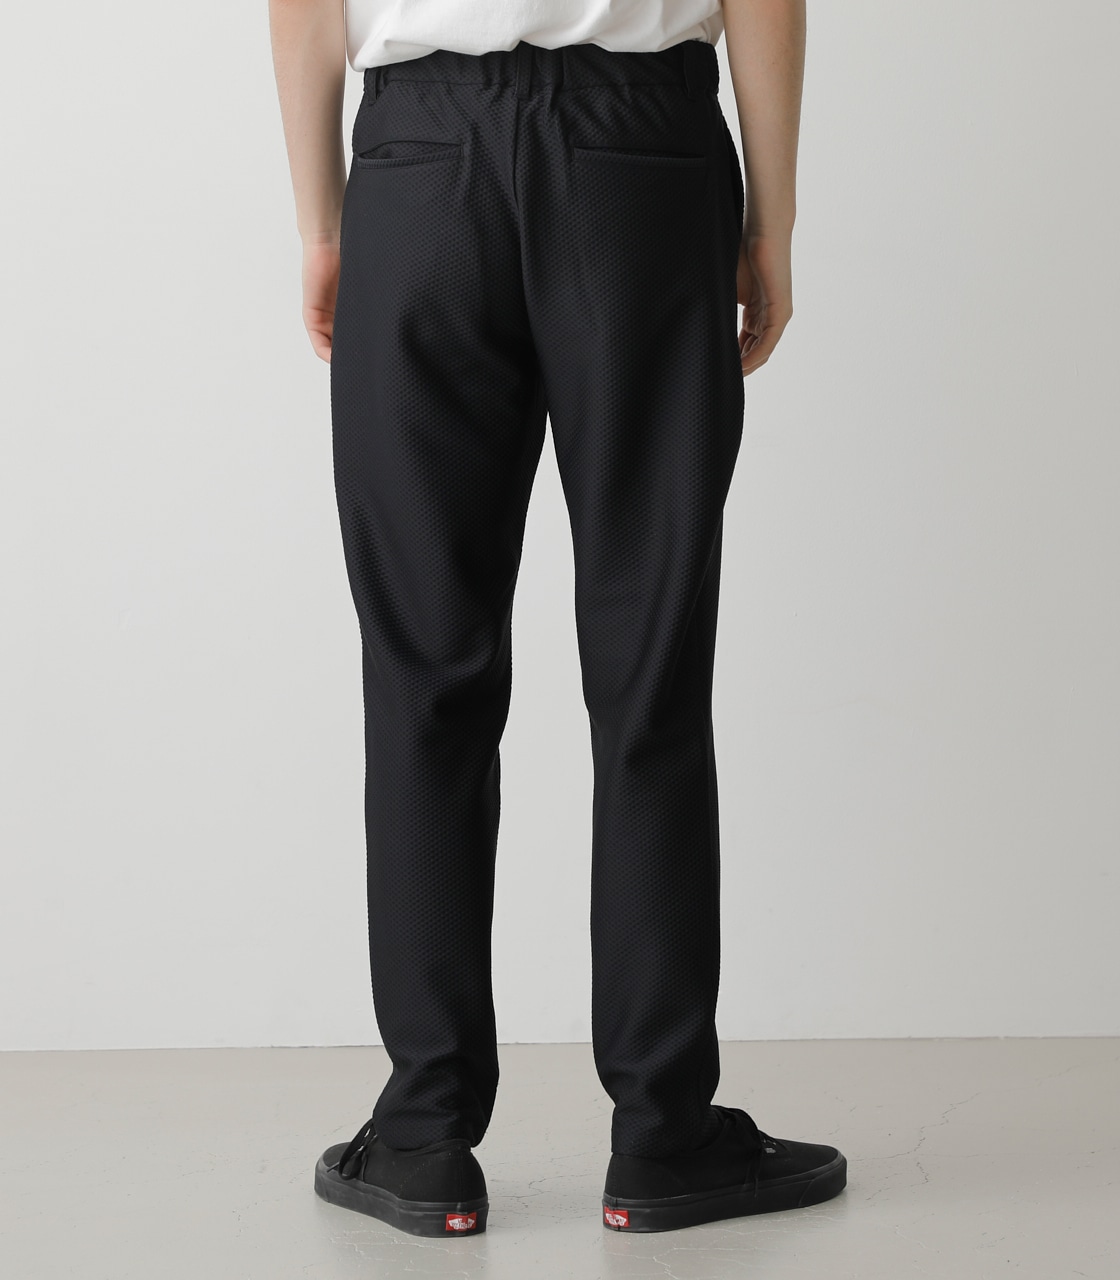 WAFFLE STRETCH PANTS/ワッフルストレッチパンツ 詳細画像 BLK 7